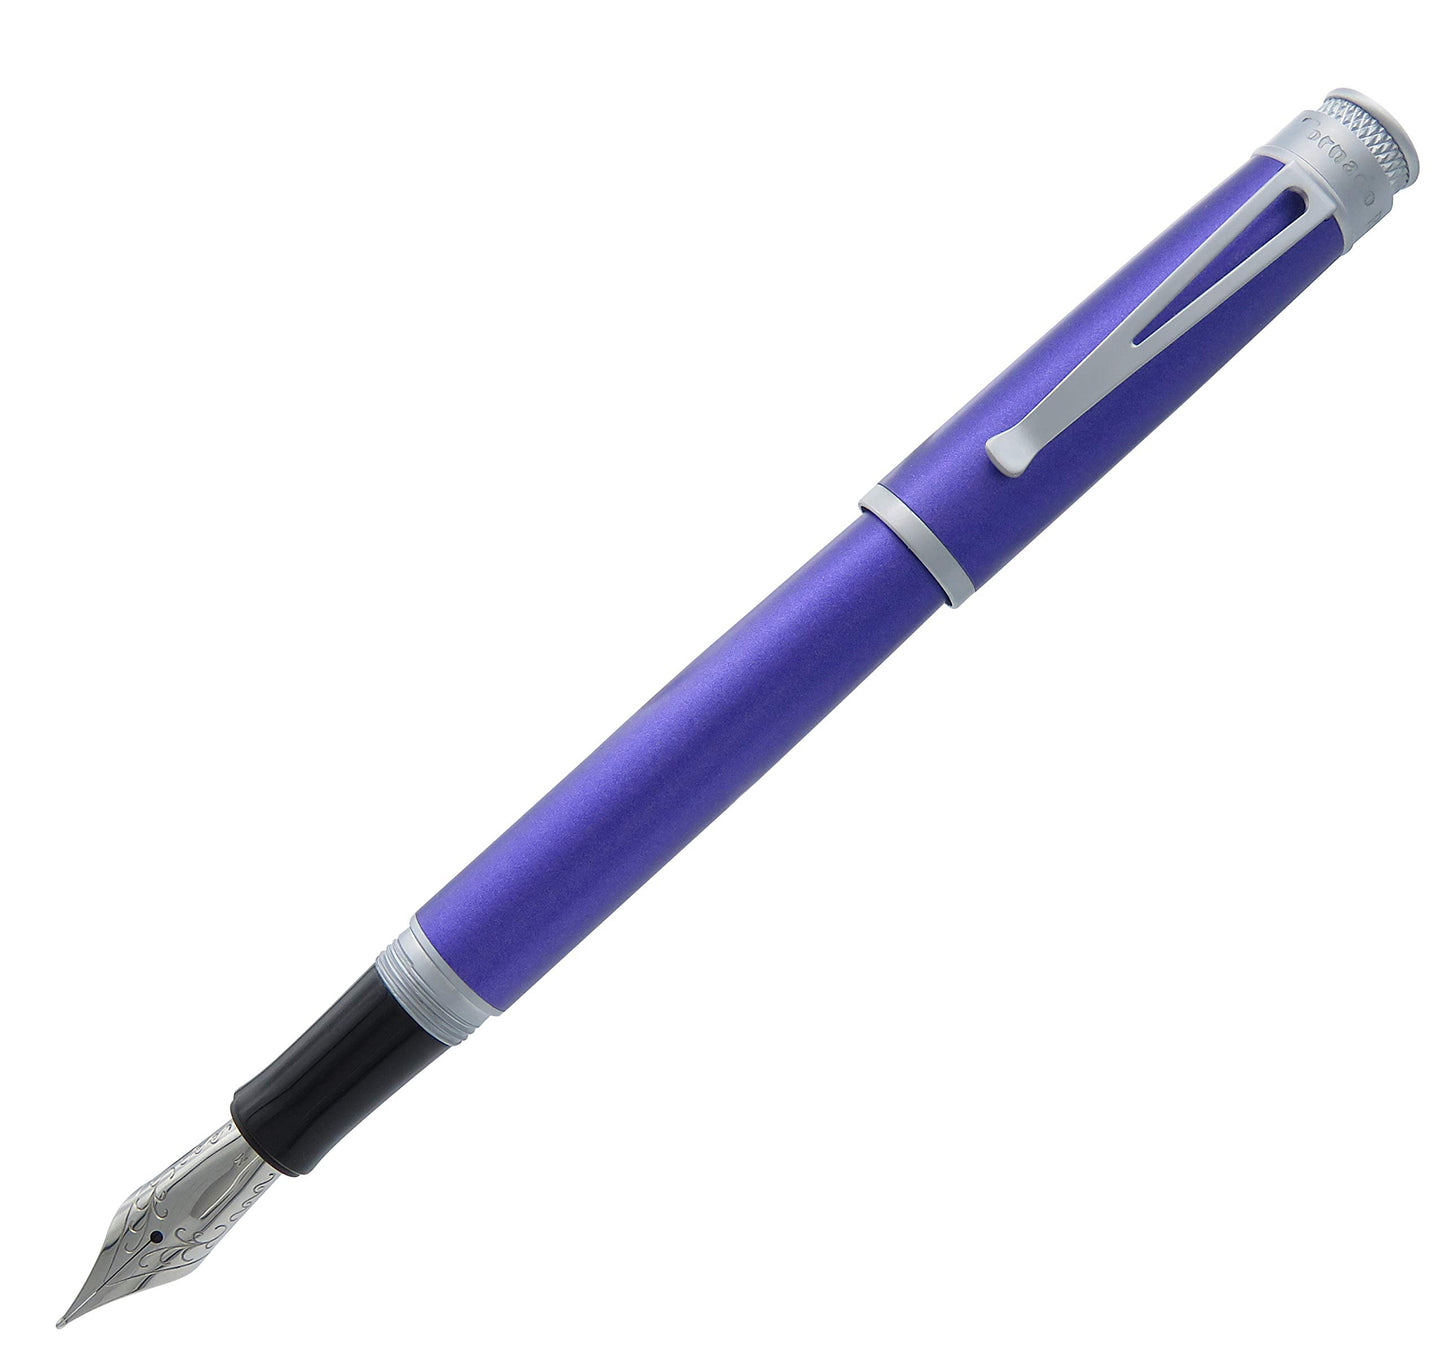 Retro 51 Frosted Metallic Ultraviolet with Satin Trim Fountain Pen